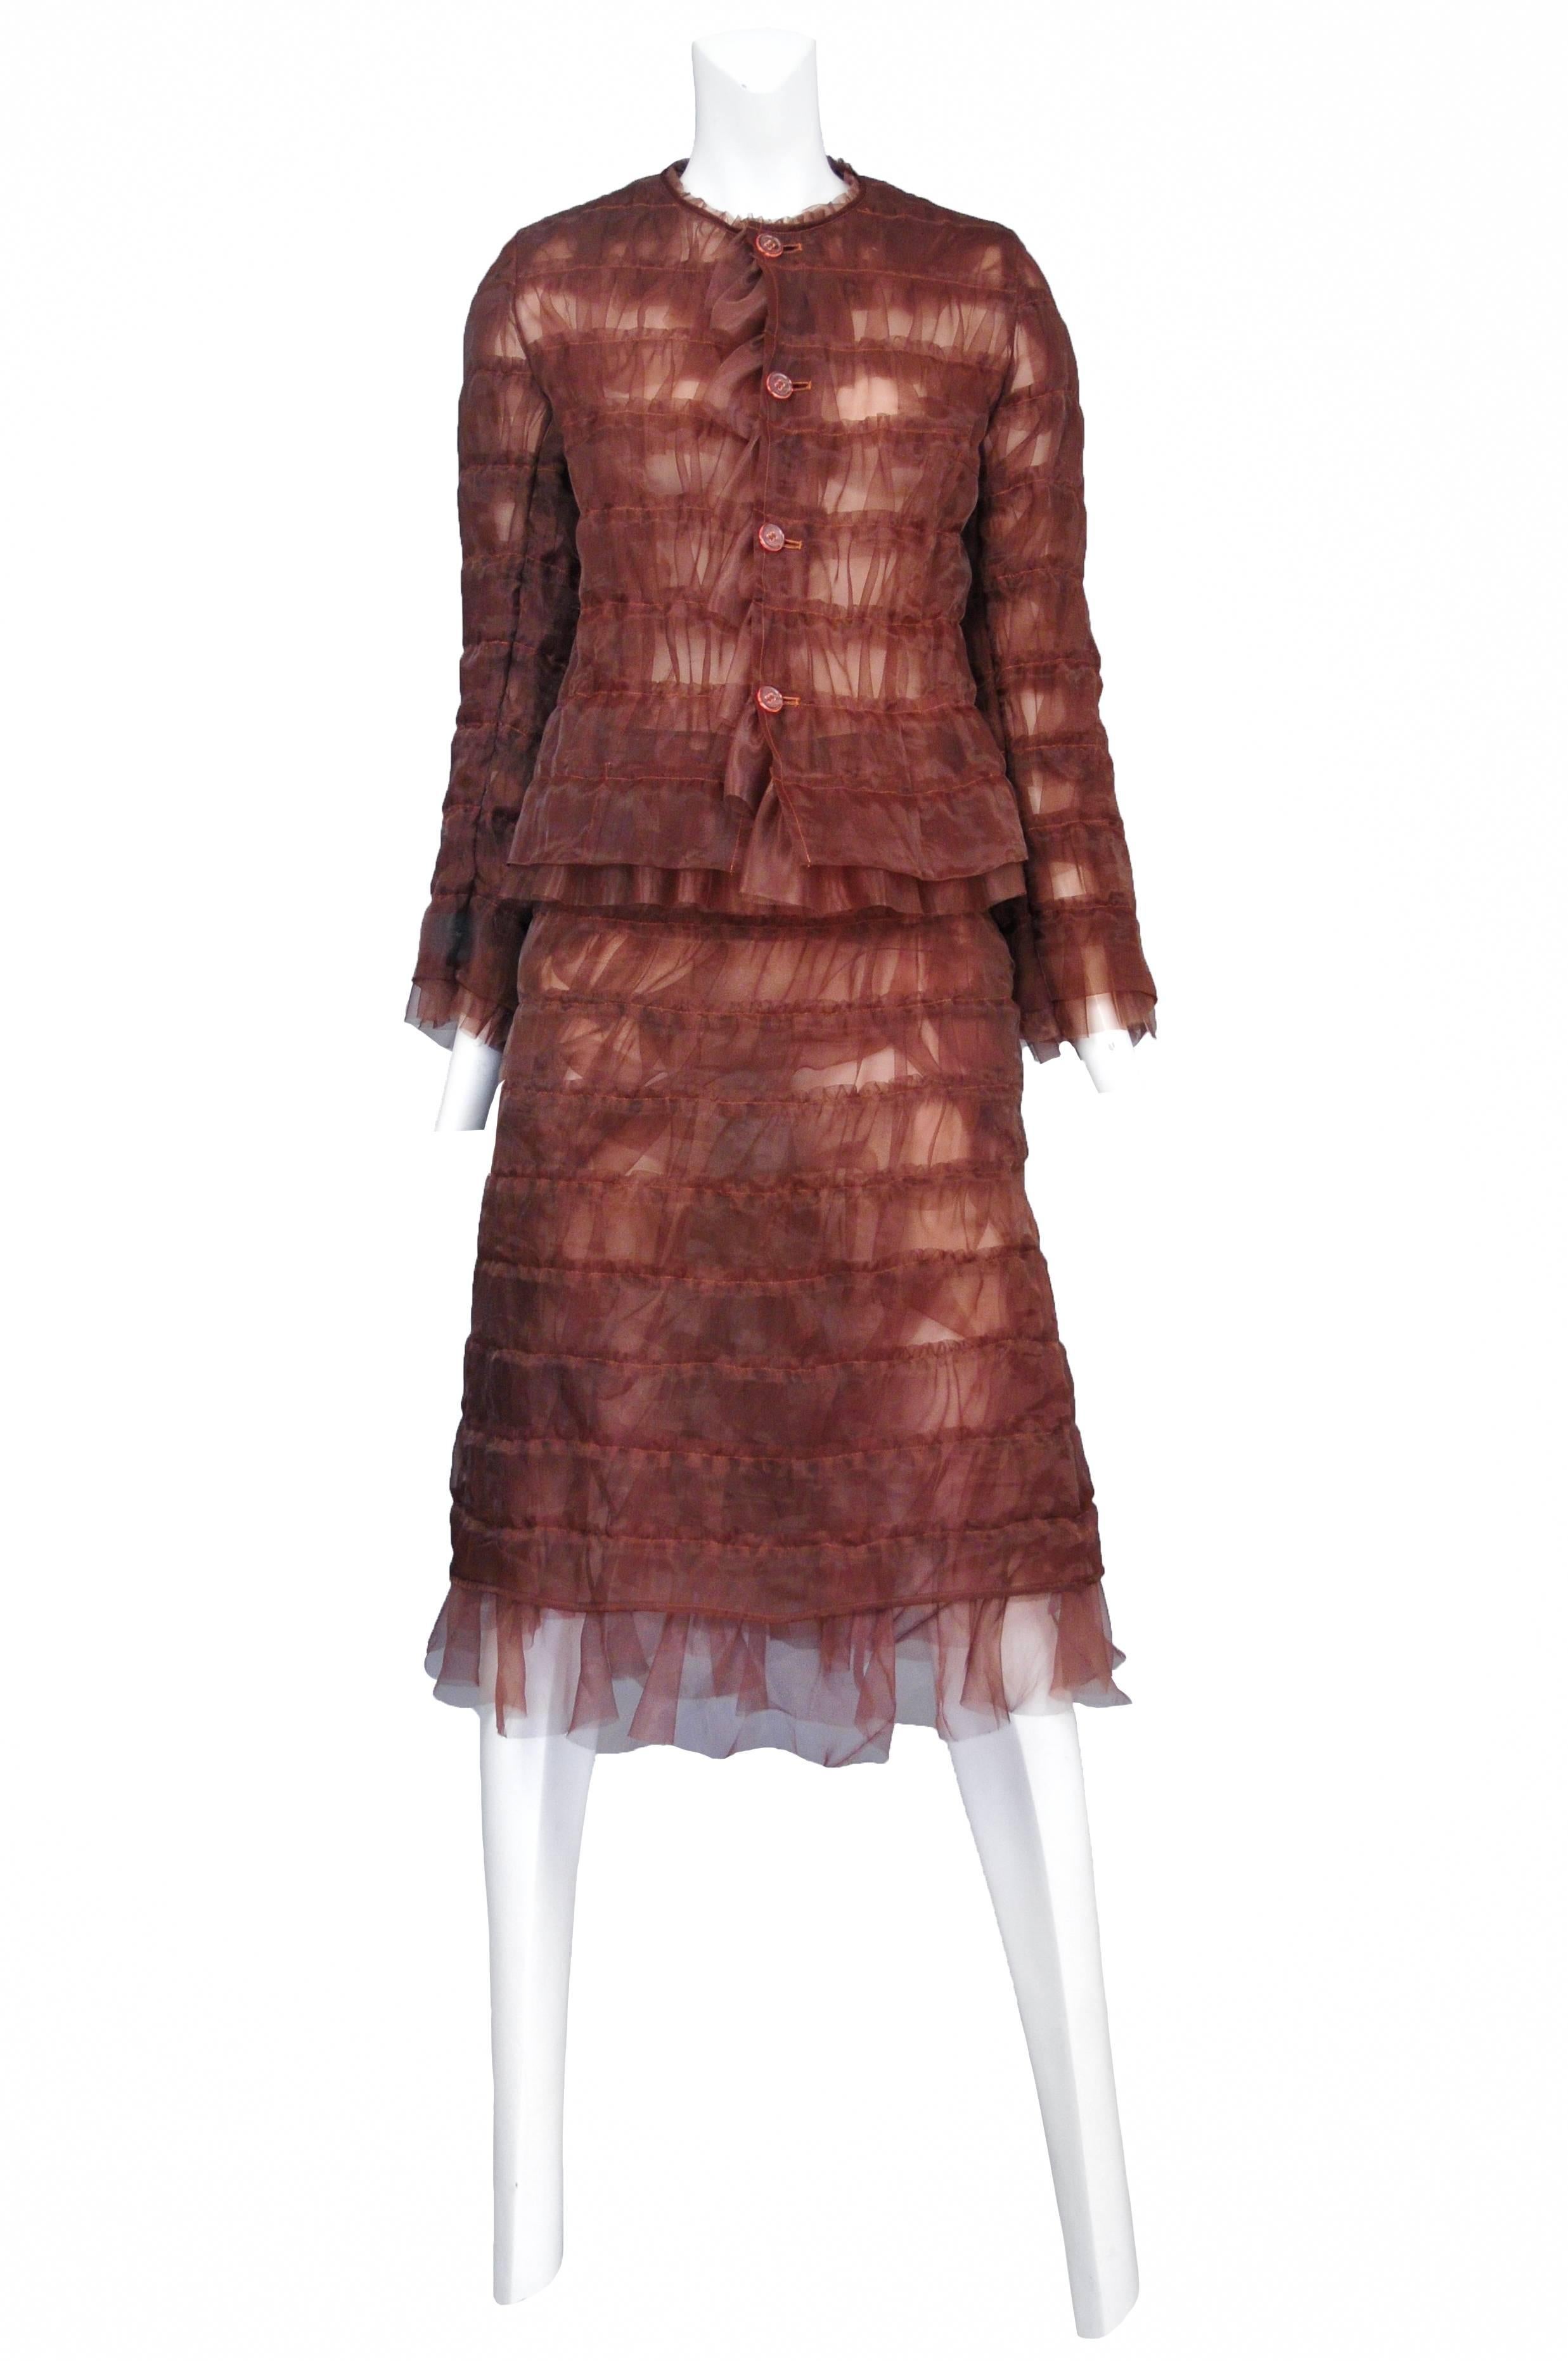 Vintage Junya Watanabe copper nylon suit featuring a four button front blazer with inverted stitched horizontal rows and ruffles at the hem and cuffs. The suit comes with a matching copper knee length skirt featuring the same horizontal stitching